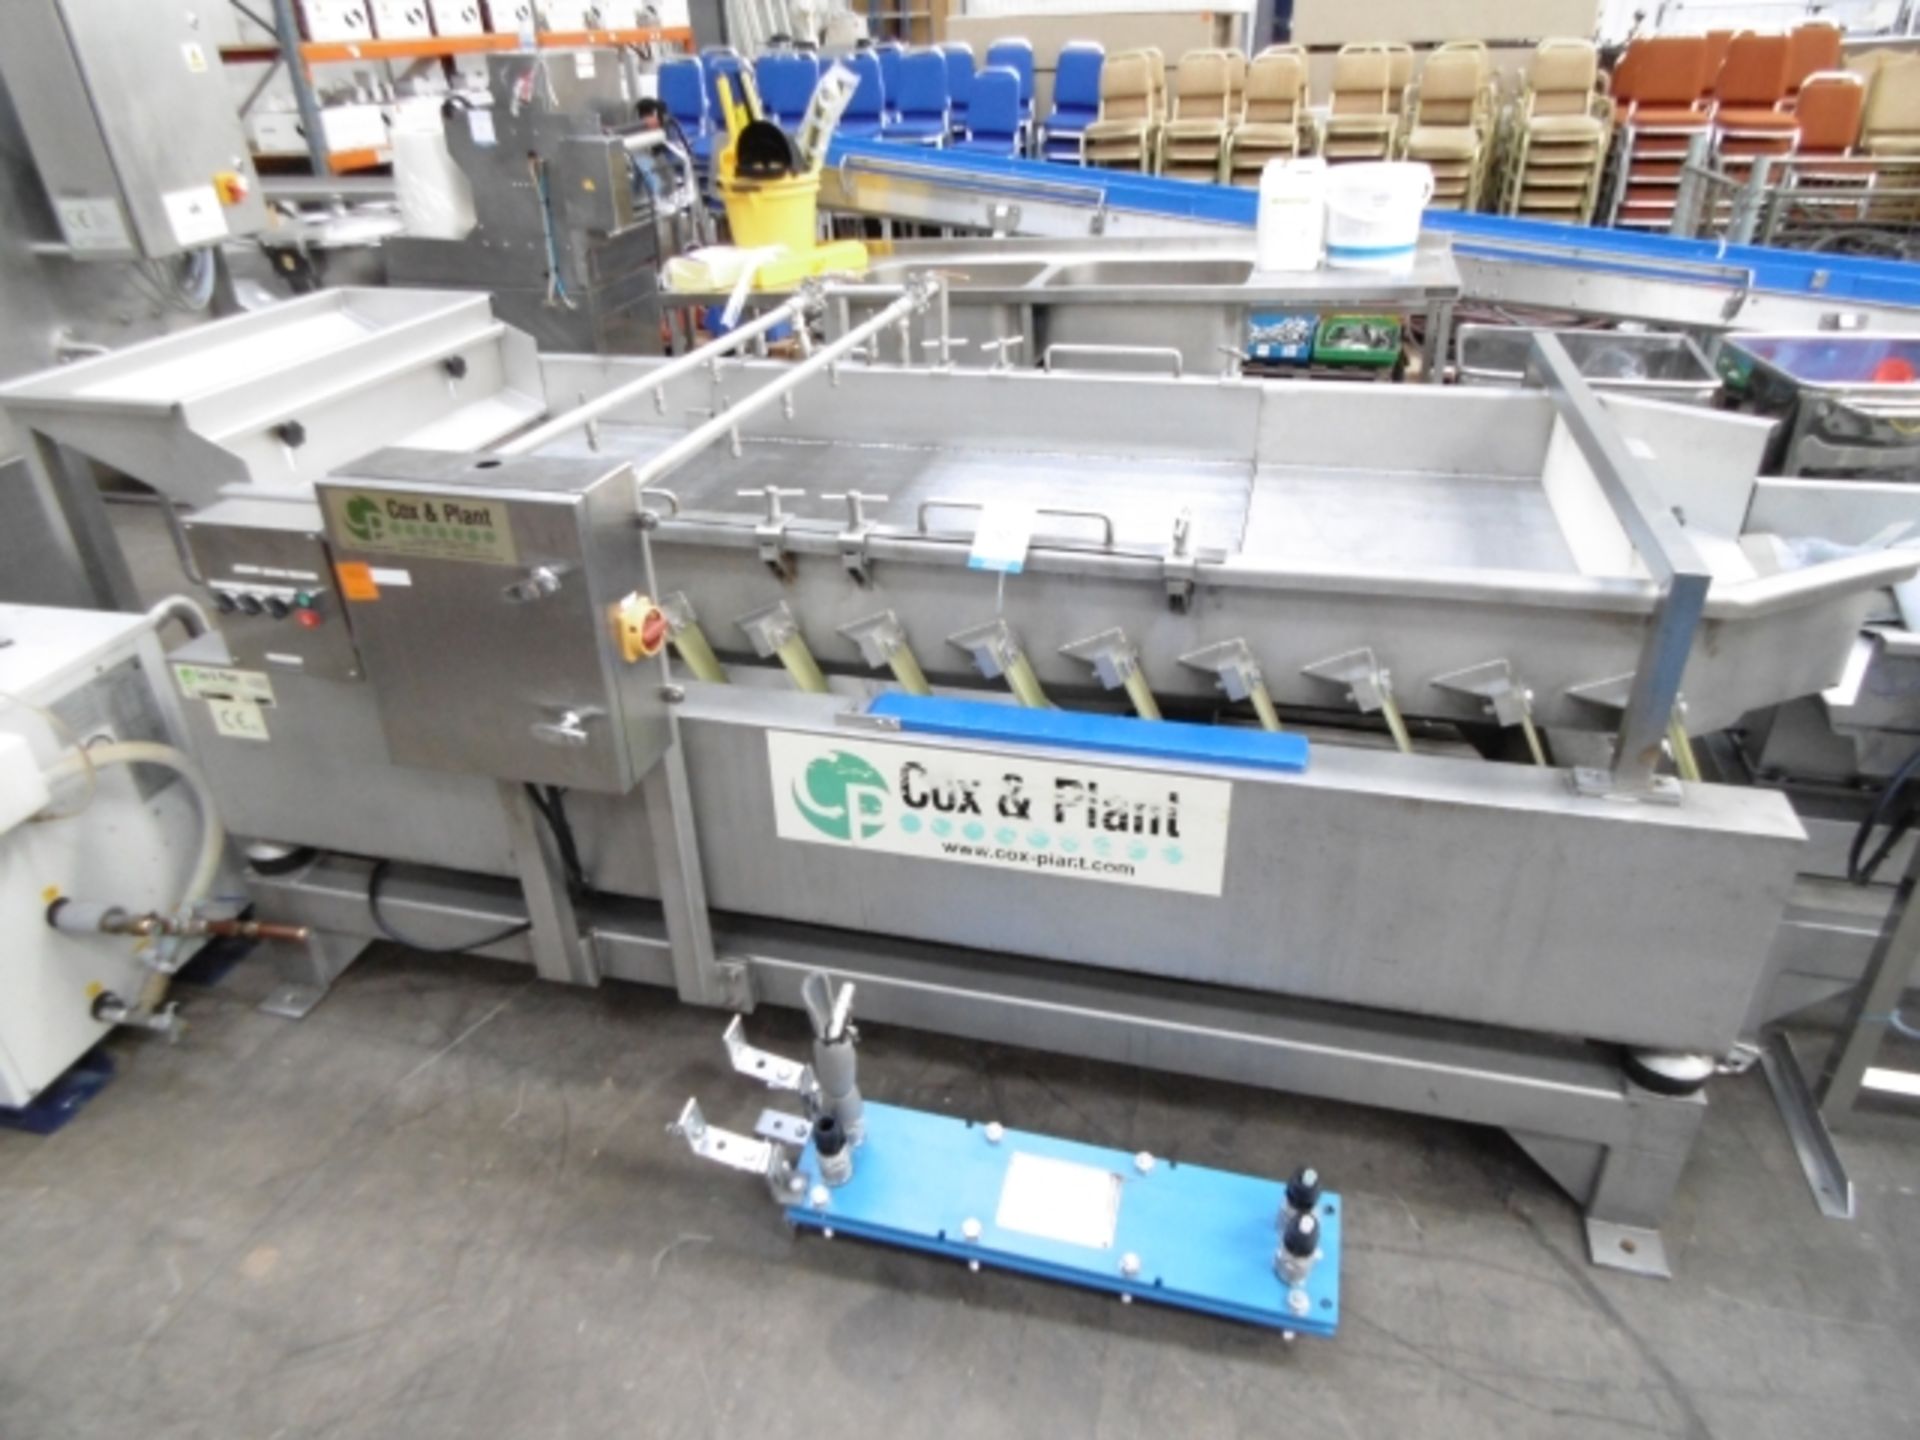 * Cox & Plant Stainless Steel Vibratory Glazing Conveyor; max recommended amplitude 6 mm; width